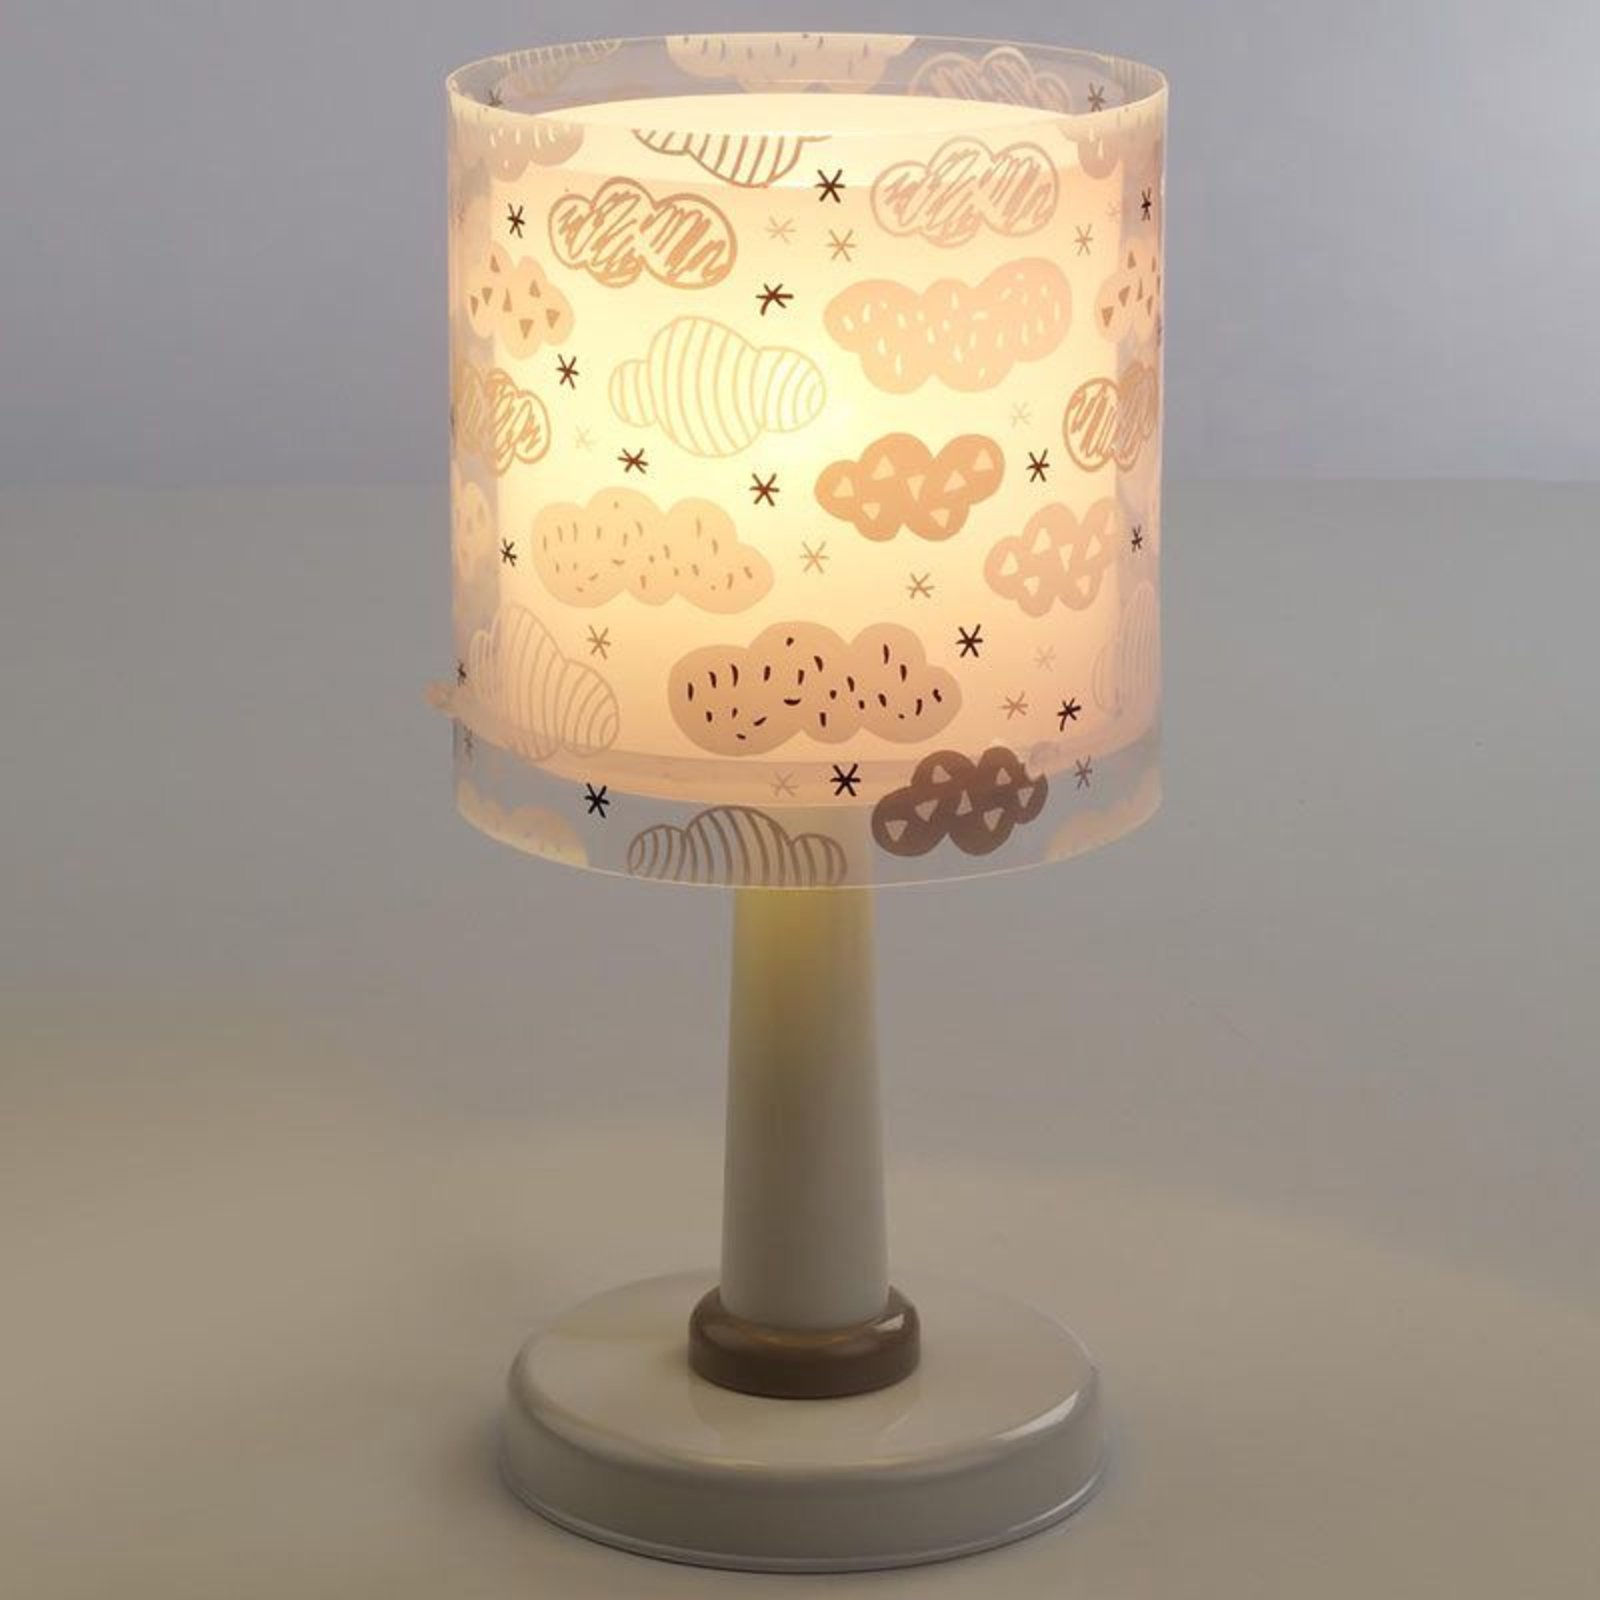 Clouds table lamp for a child’s room, pink